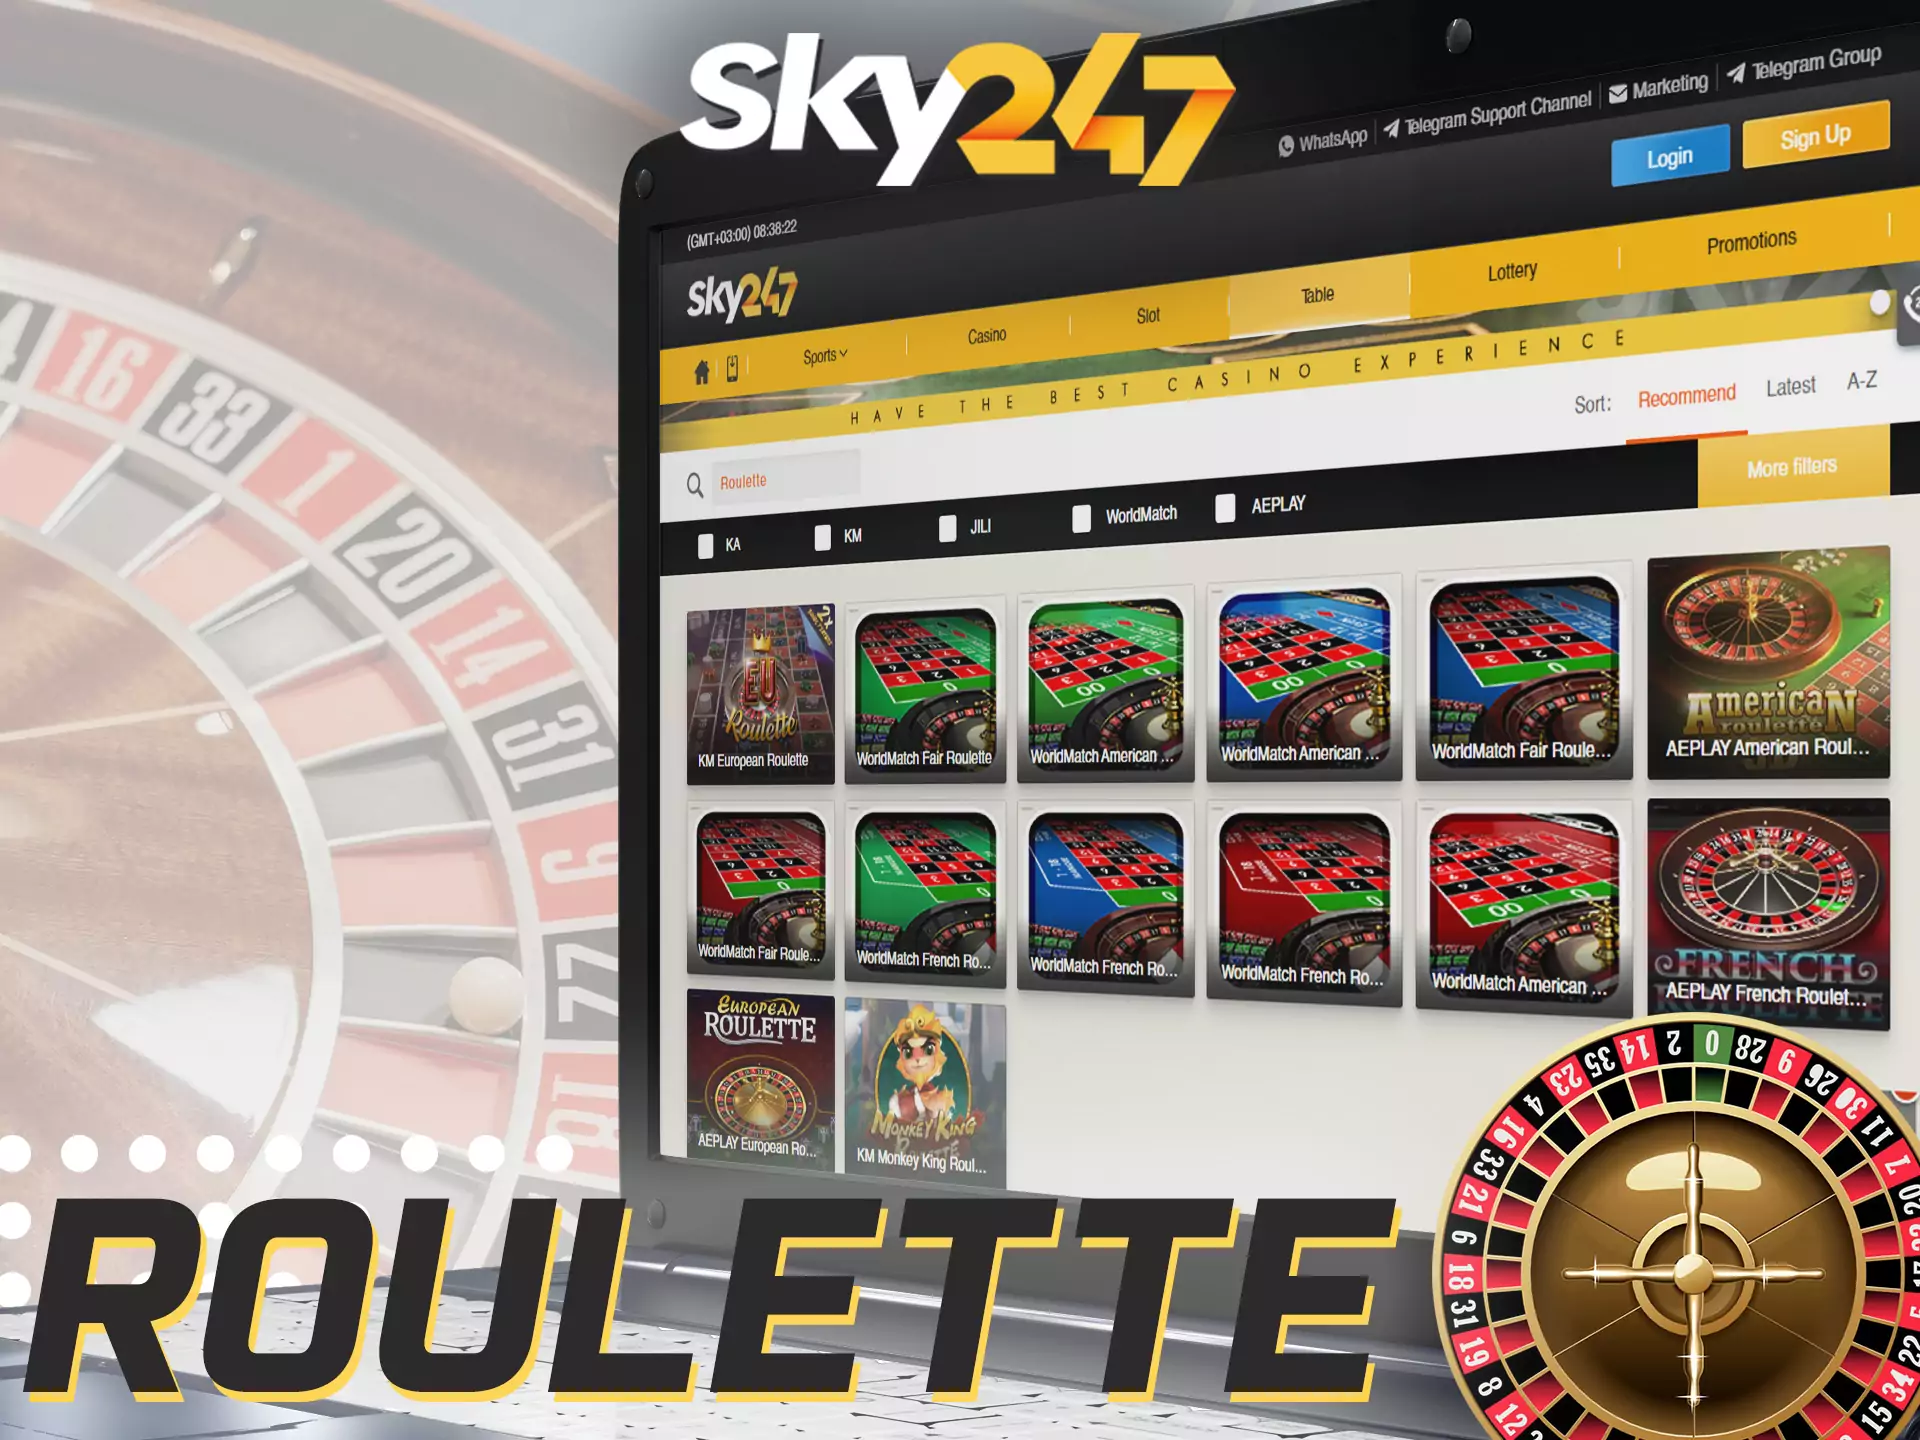 On Sky247, you can play different types of roulette games.